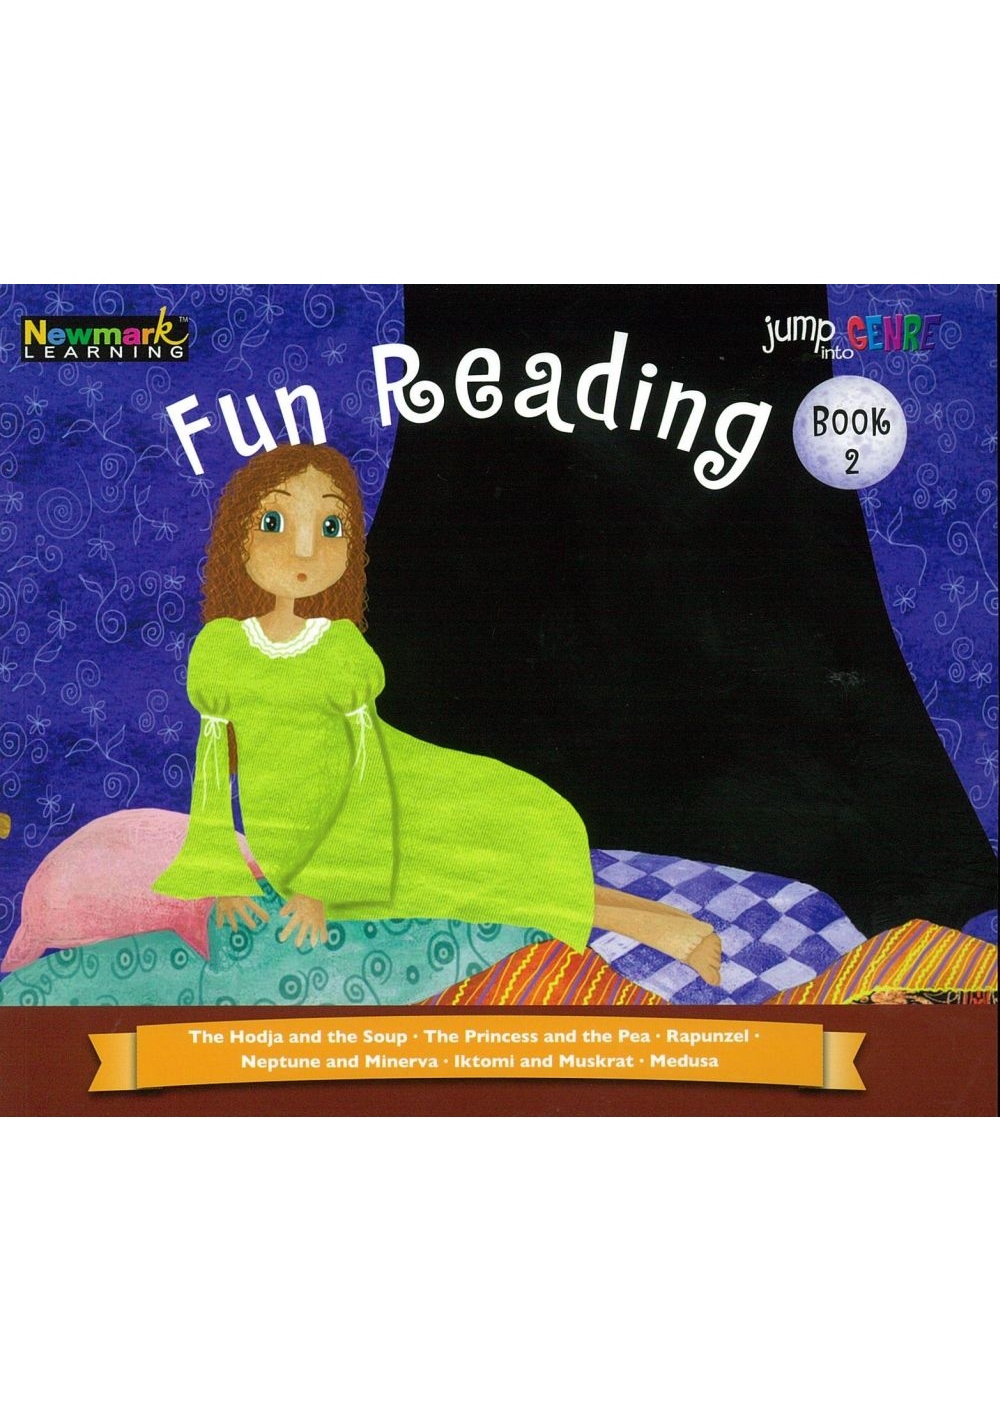 Newmark Fun Reading Book 2 (with MP3)